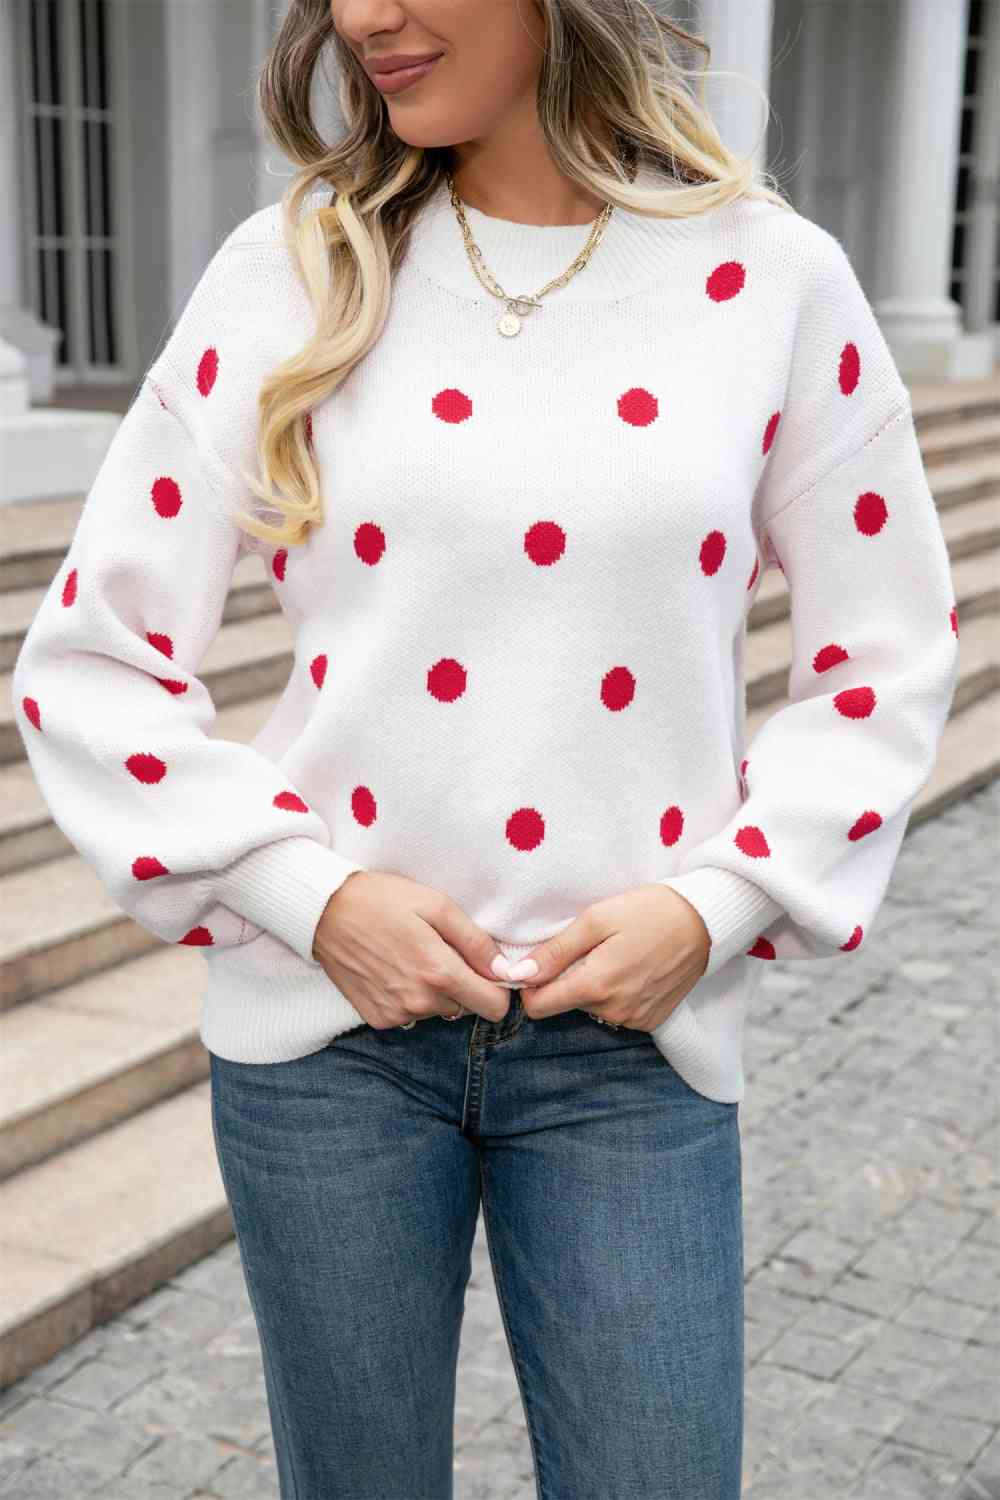 Woven Right Polka Dot Round Neck Dropped Shoulder Sweater White